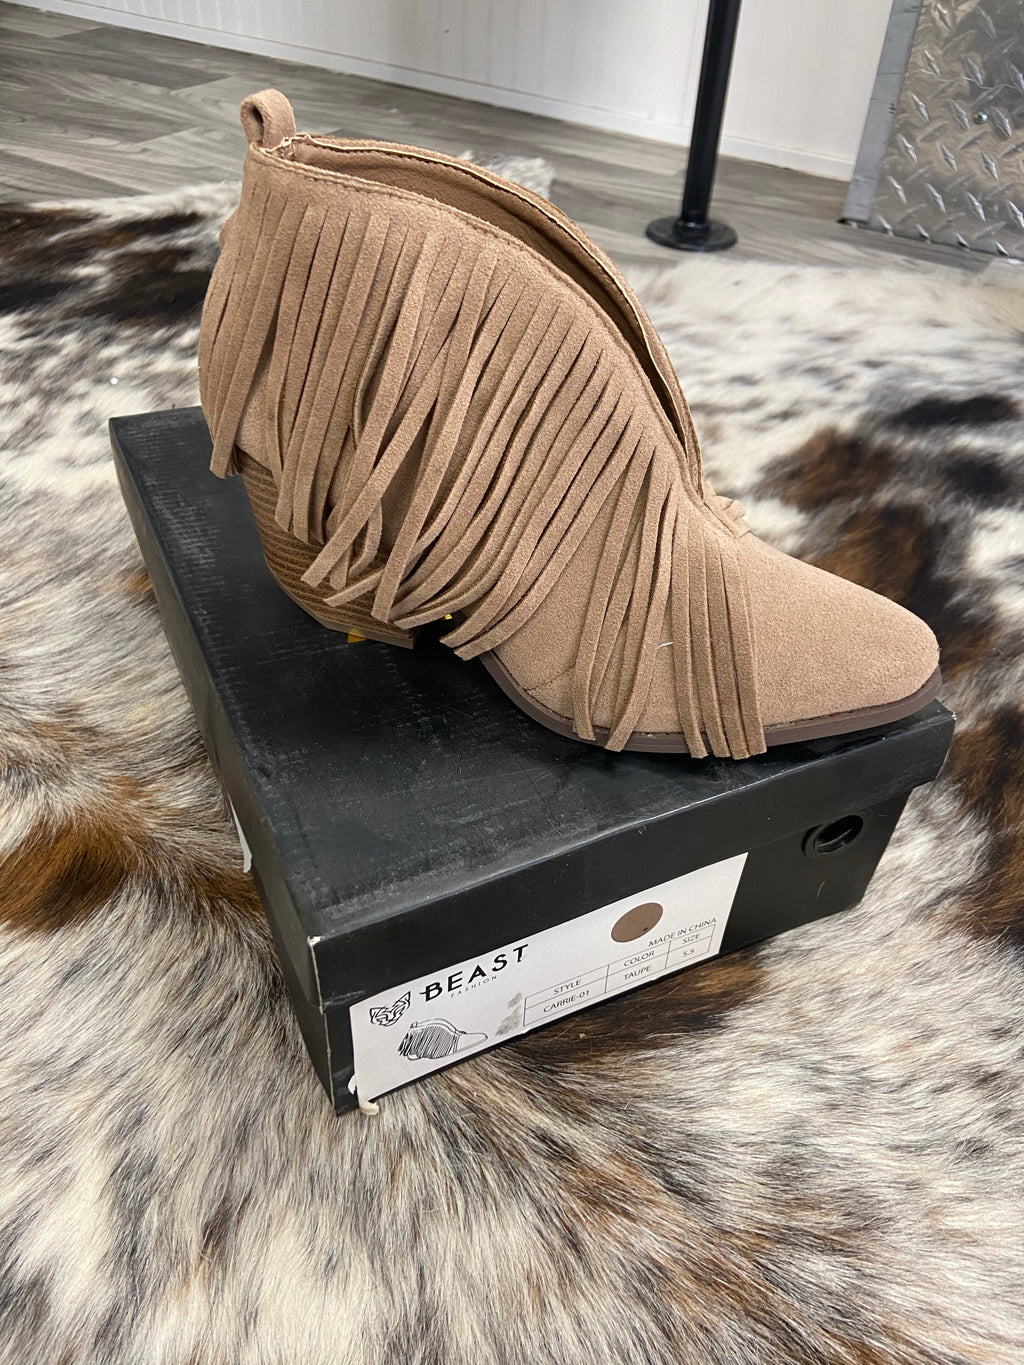 Taupe Fringe Booties